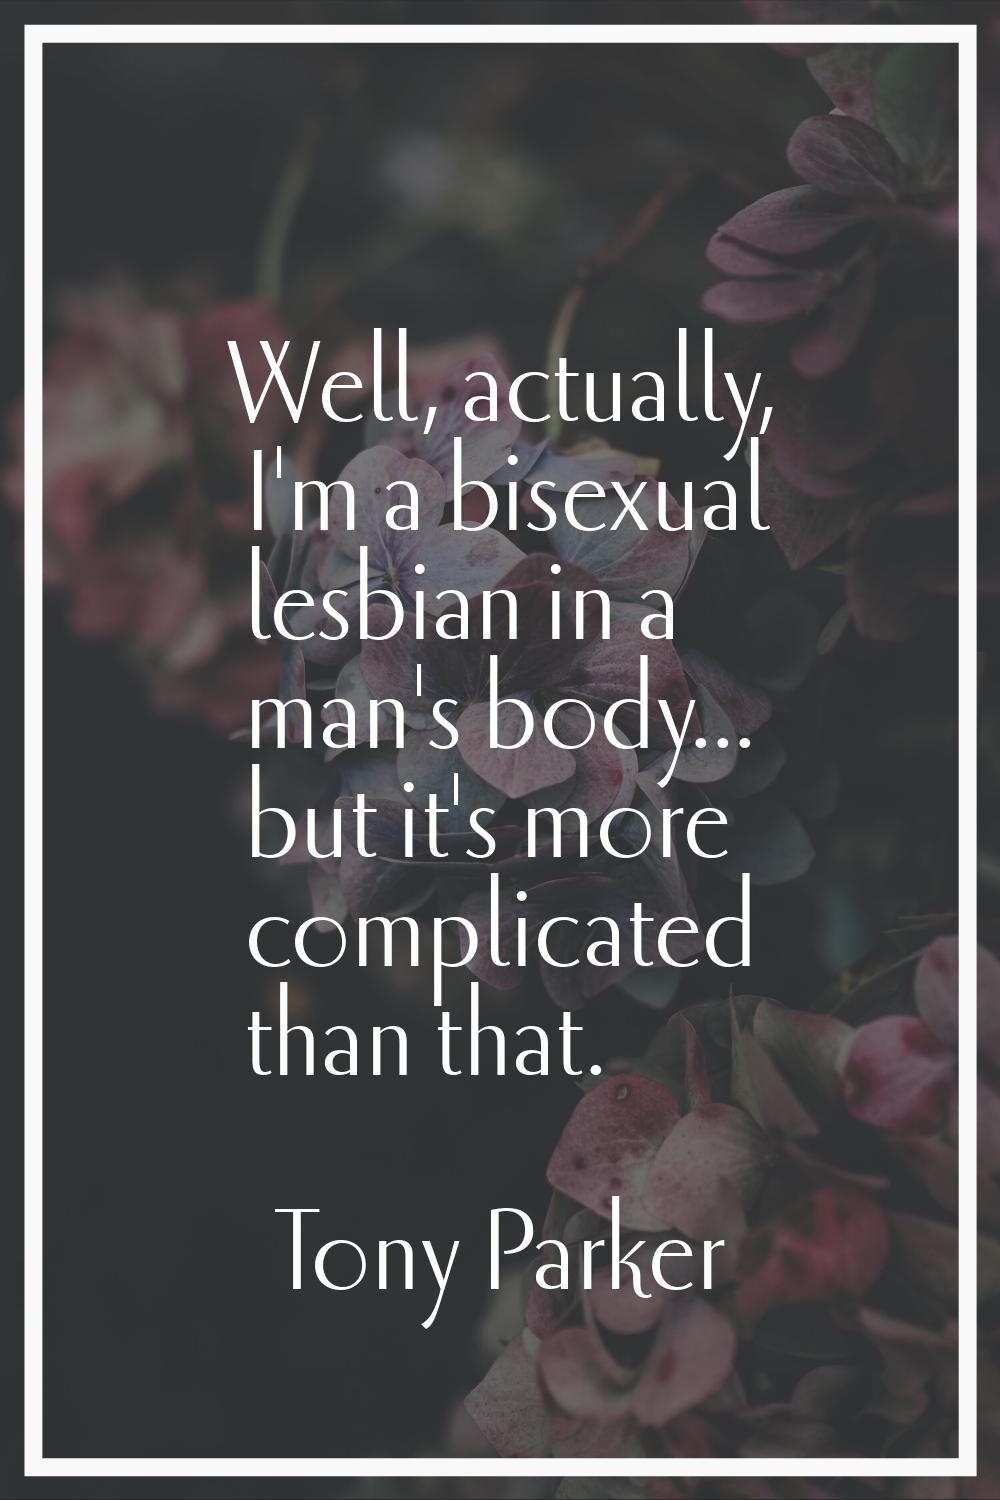 Well, actually, I'm a bisexual lesbian in a man's body... but it's more complicated than that.